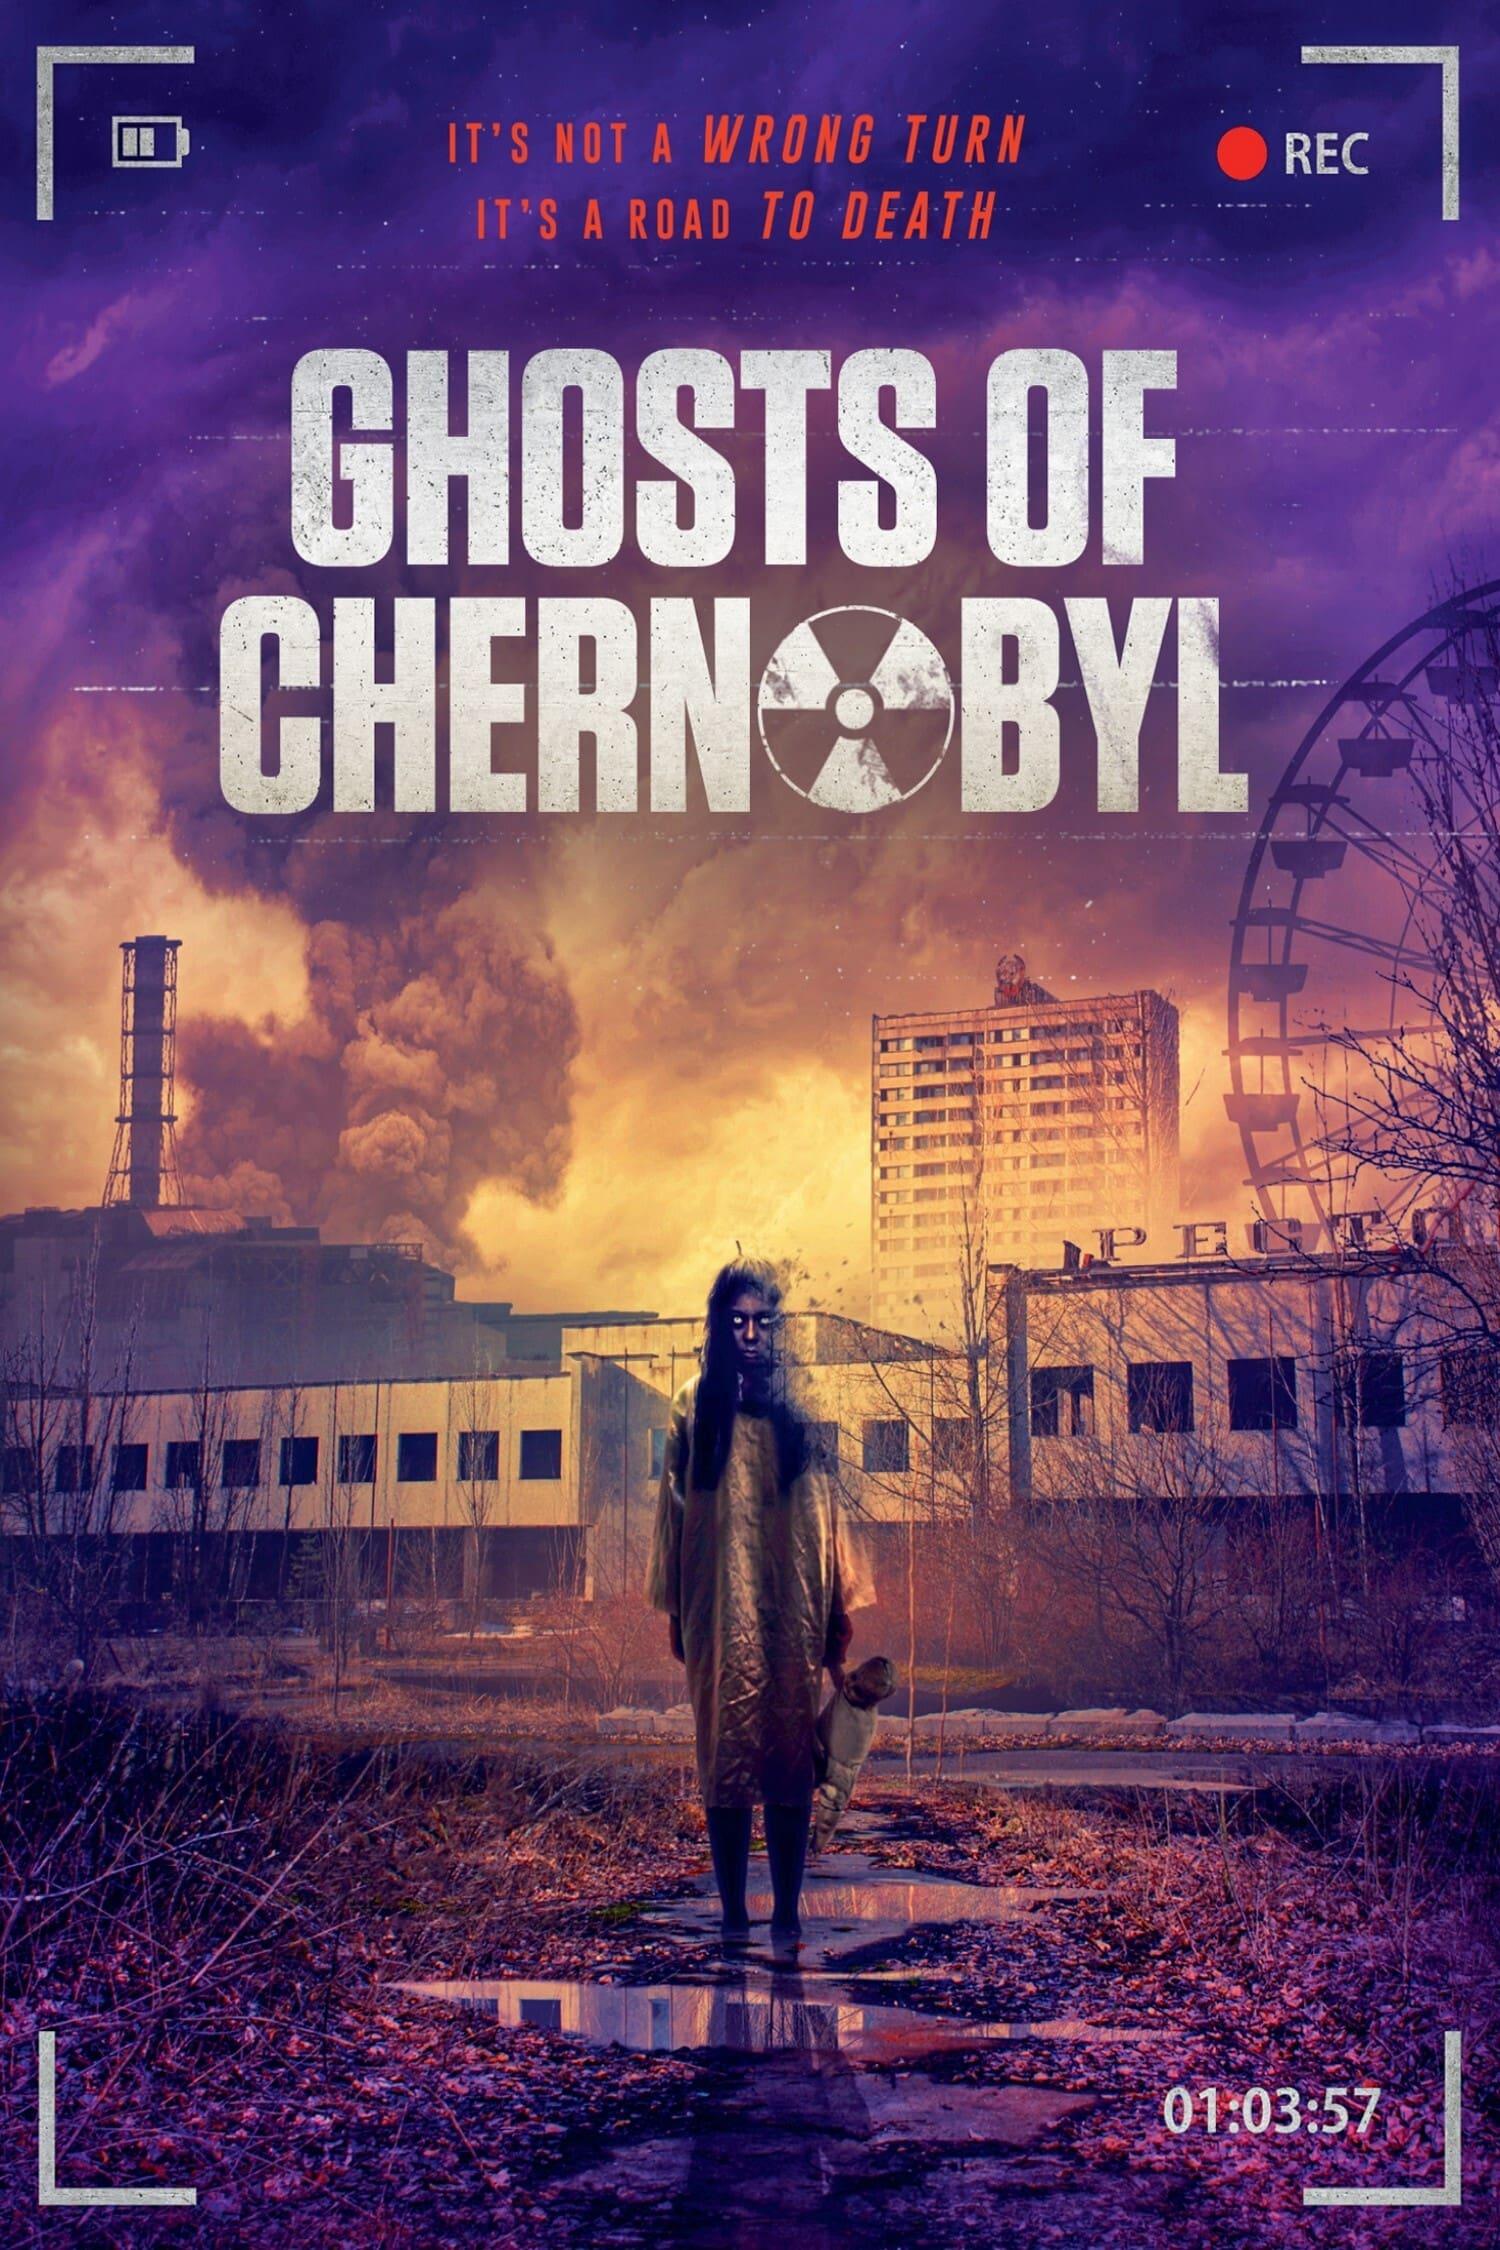 After Chernobyl poster